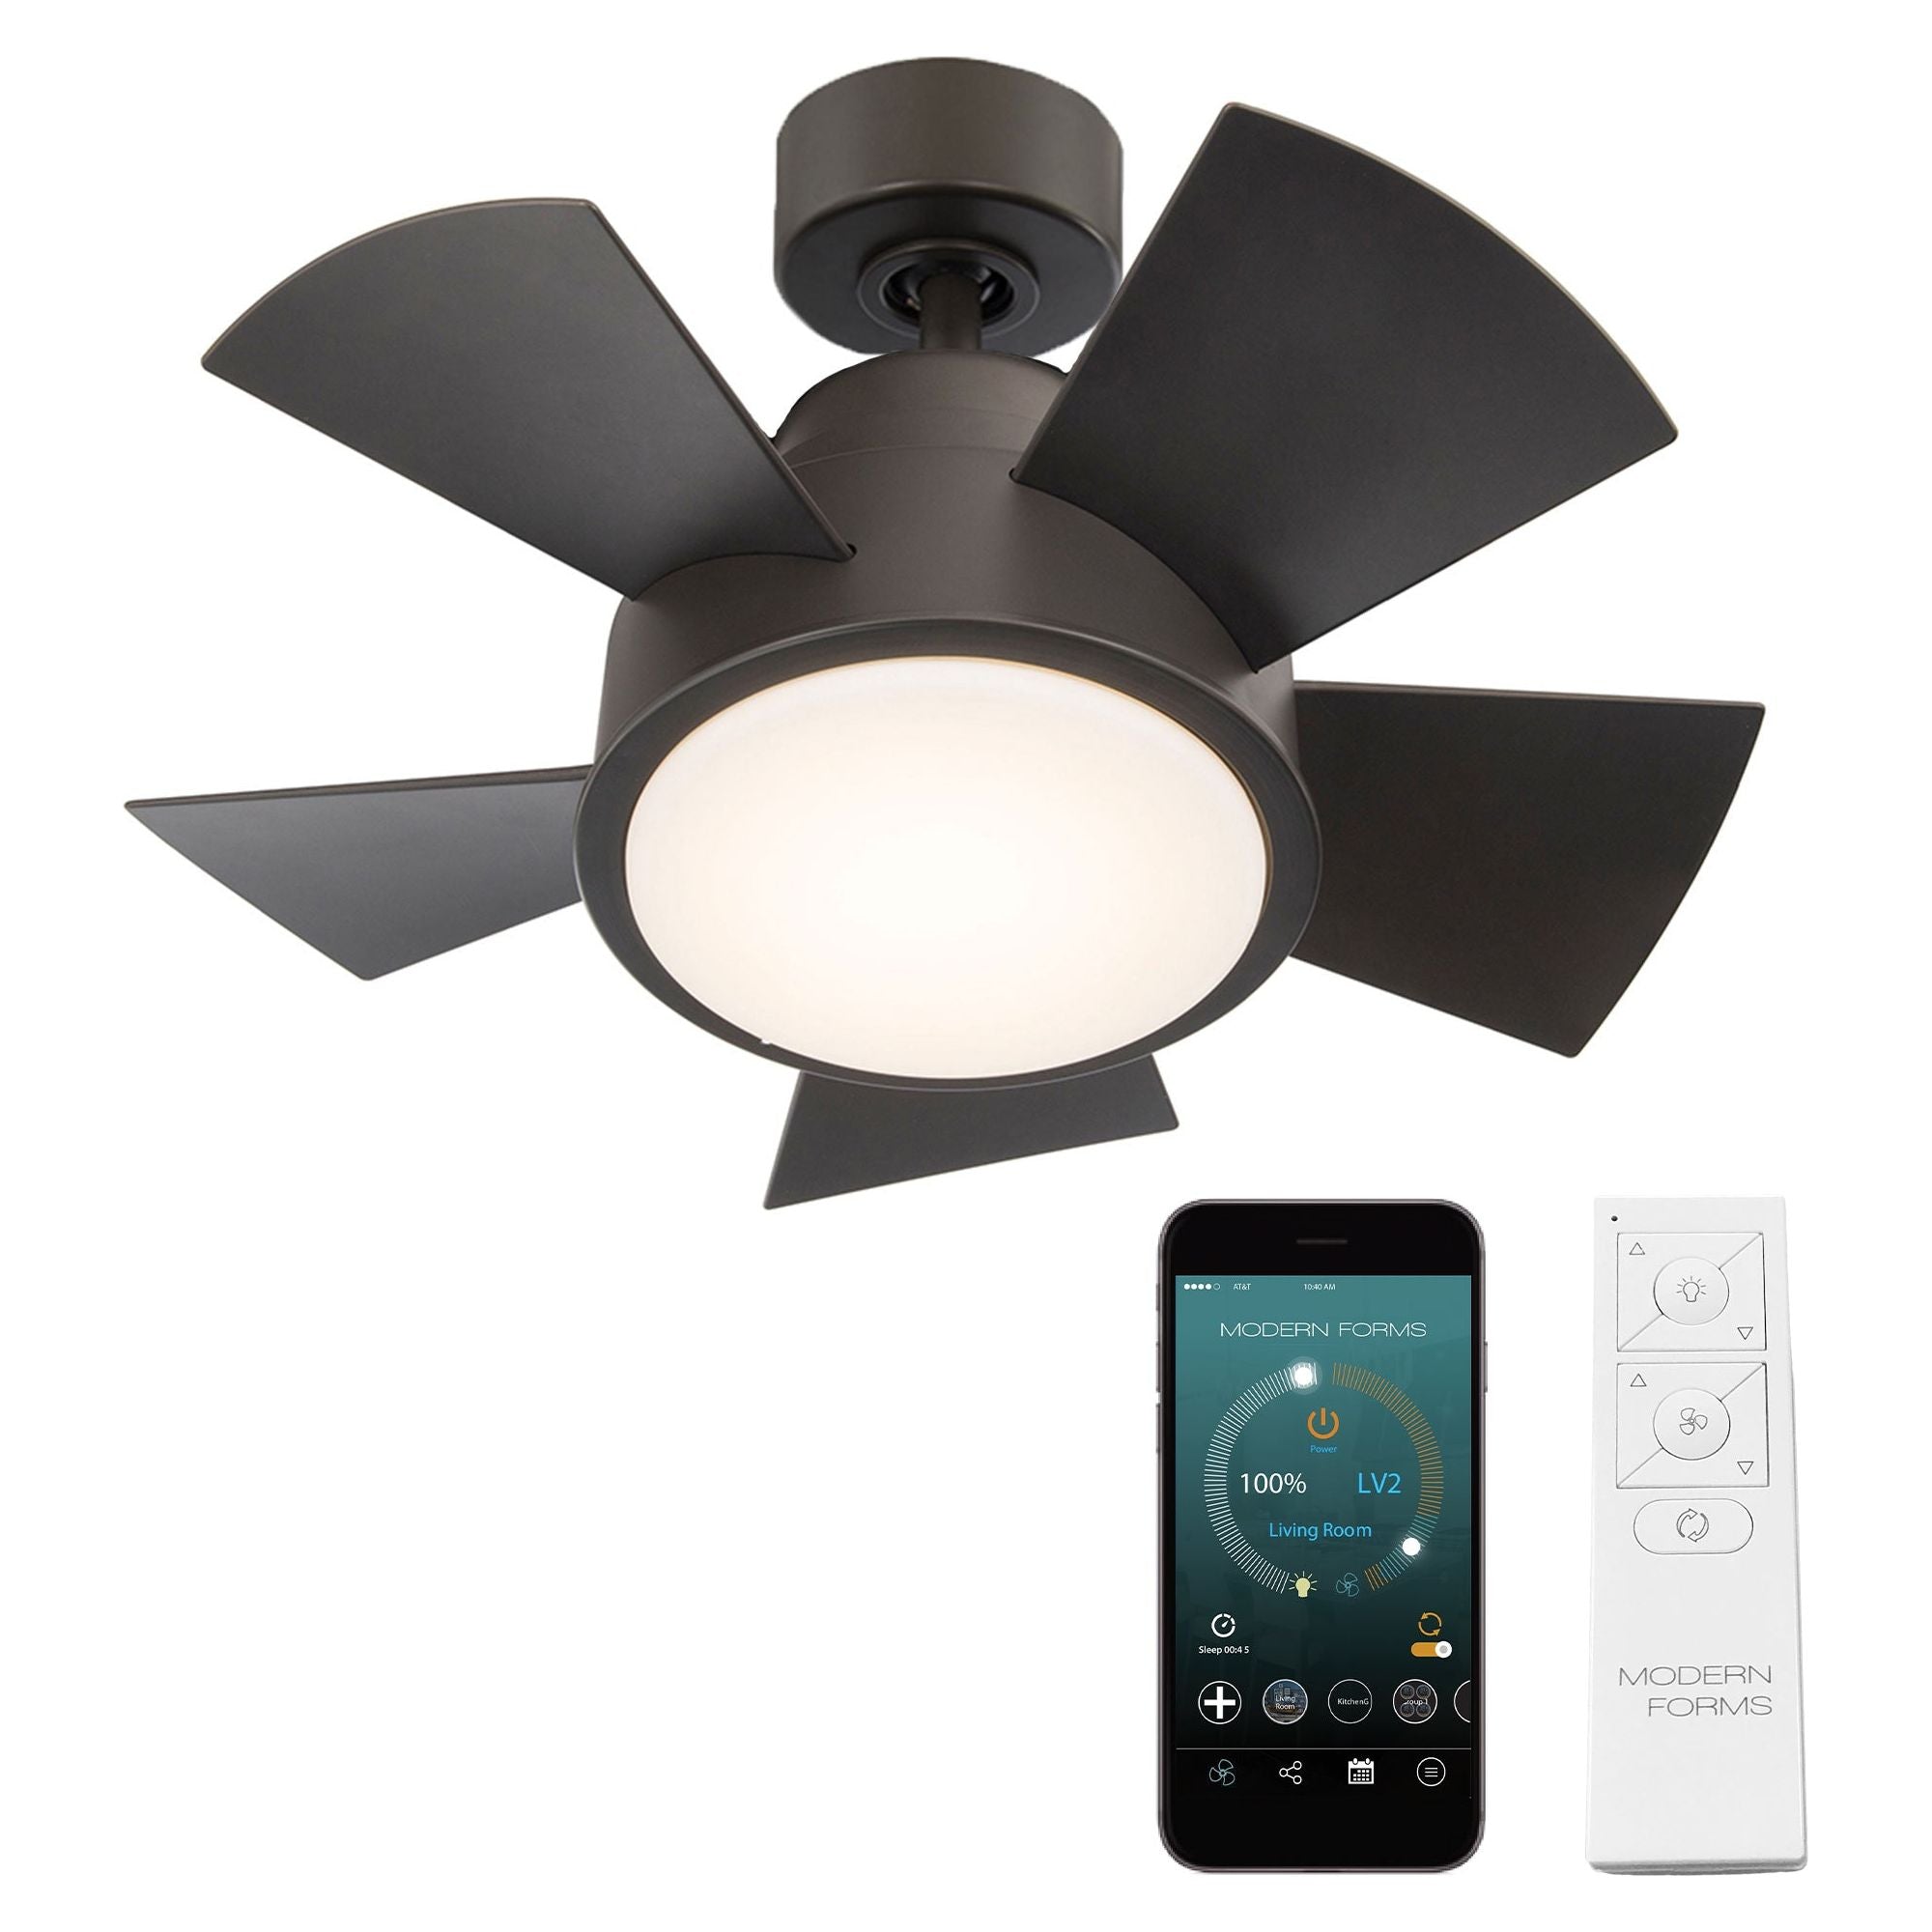 Vox Indoor/Outdoor 5-Blade 26" Smart Ceiling Fan with LED Light Kit and Remote Control